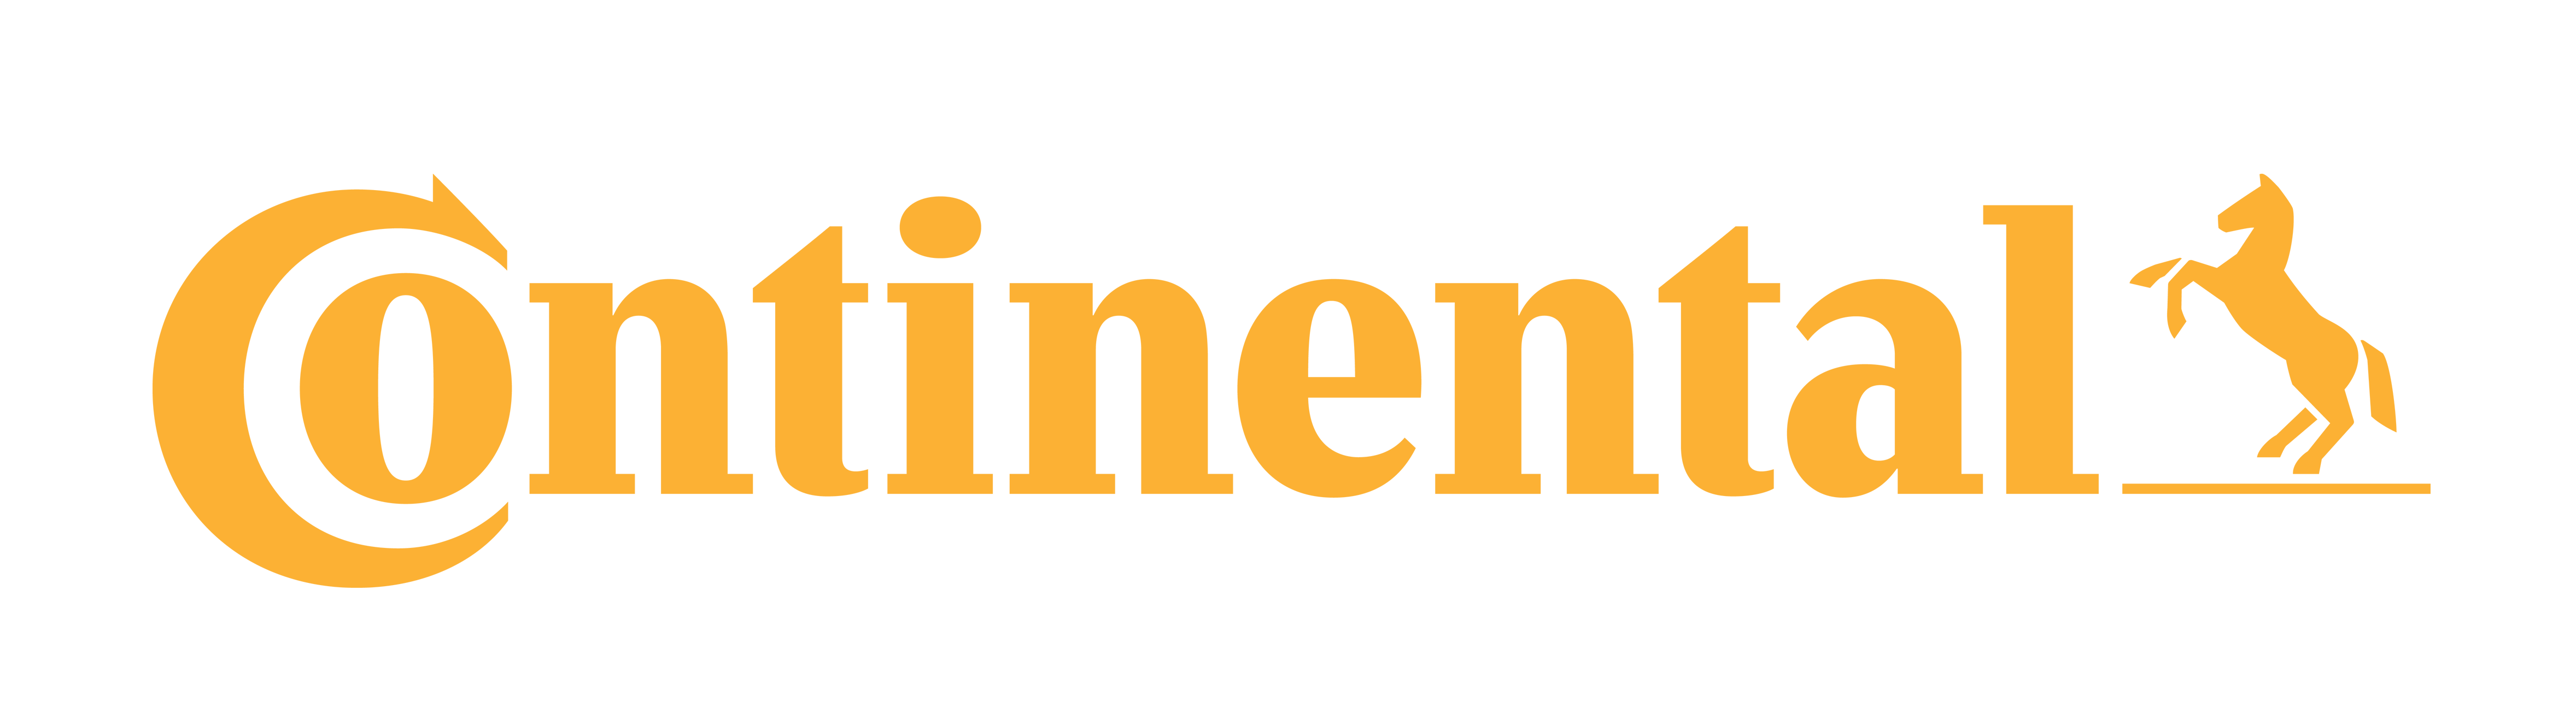 Continental Logo, Png, Meaning, Continental Logo PNG - Free PNG